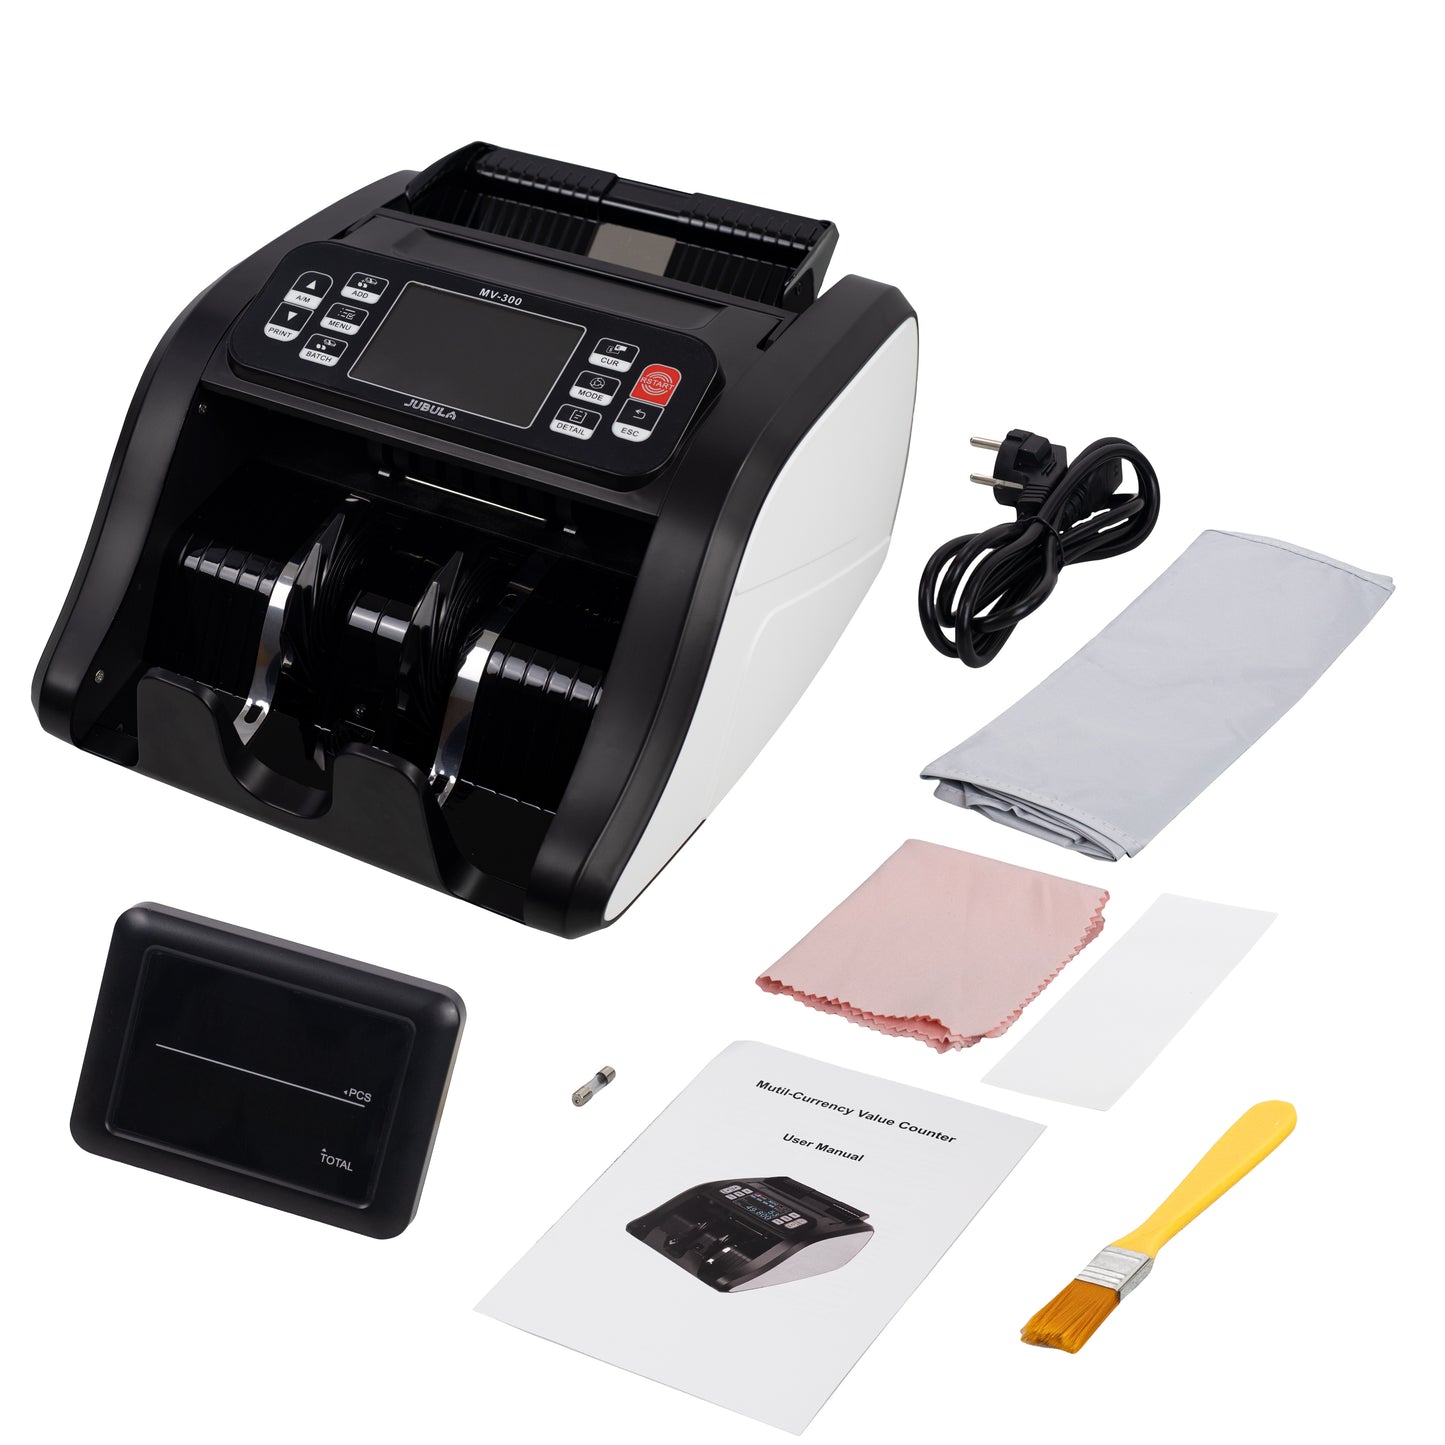 Jubula MV-300 Money Counting Machine That Value Counts Mixed banknotes | EUR USD GBP | Cash Counting Machine with 8-Point Counterfeit Money Detector | Money Counter Machine